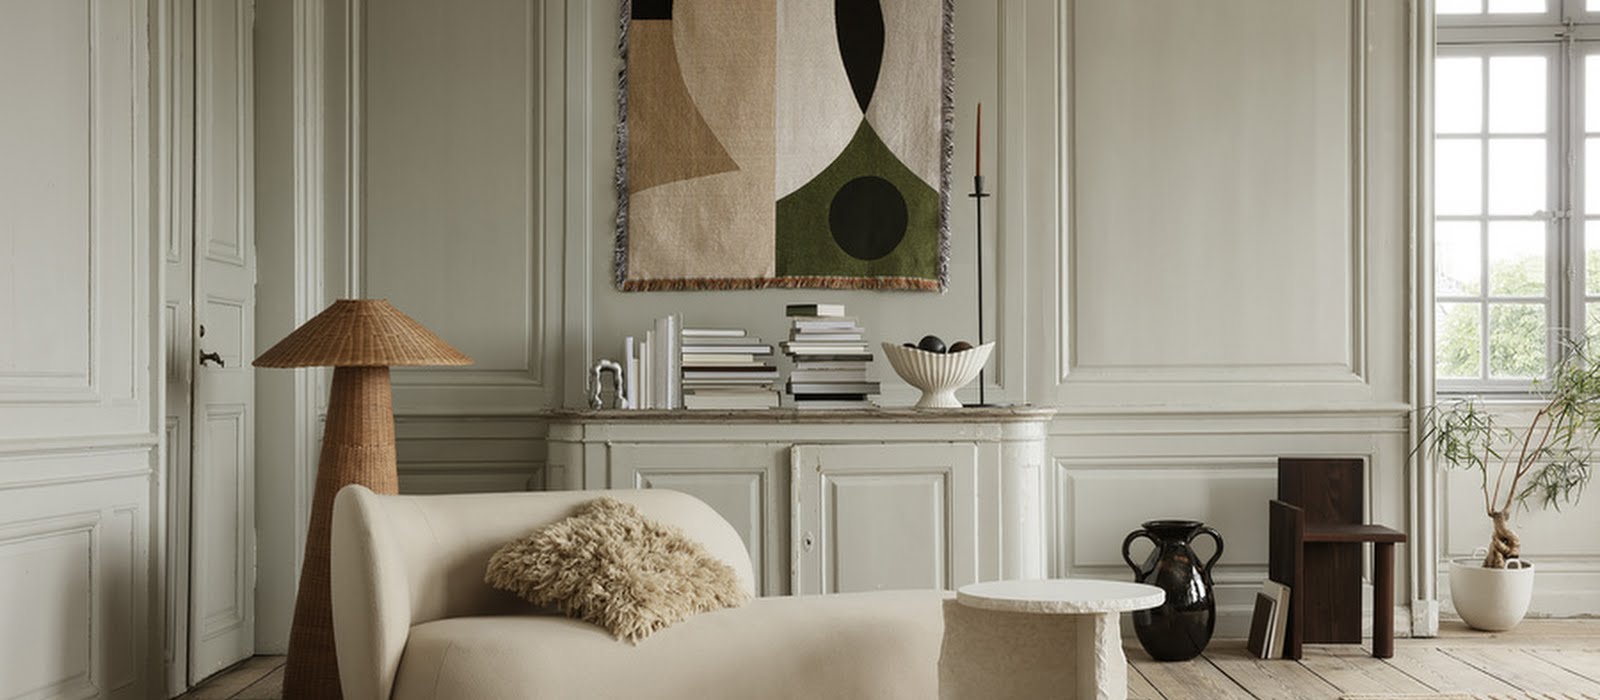 The Ferm Living a/w collection is here, and with it our interiors inspiration for the whole season